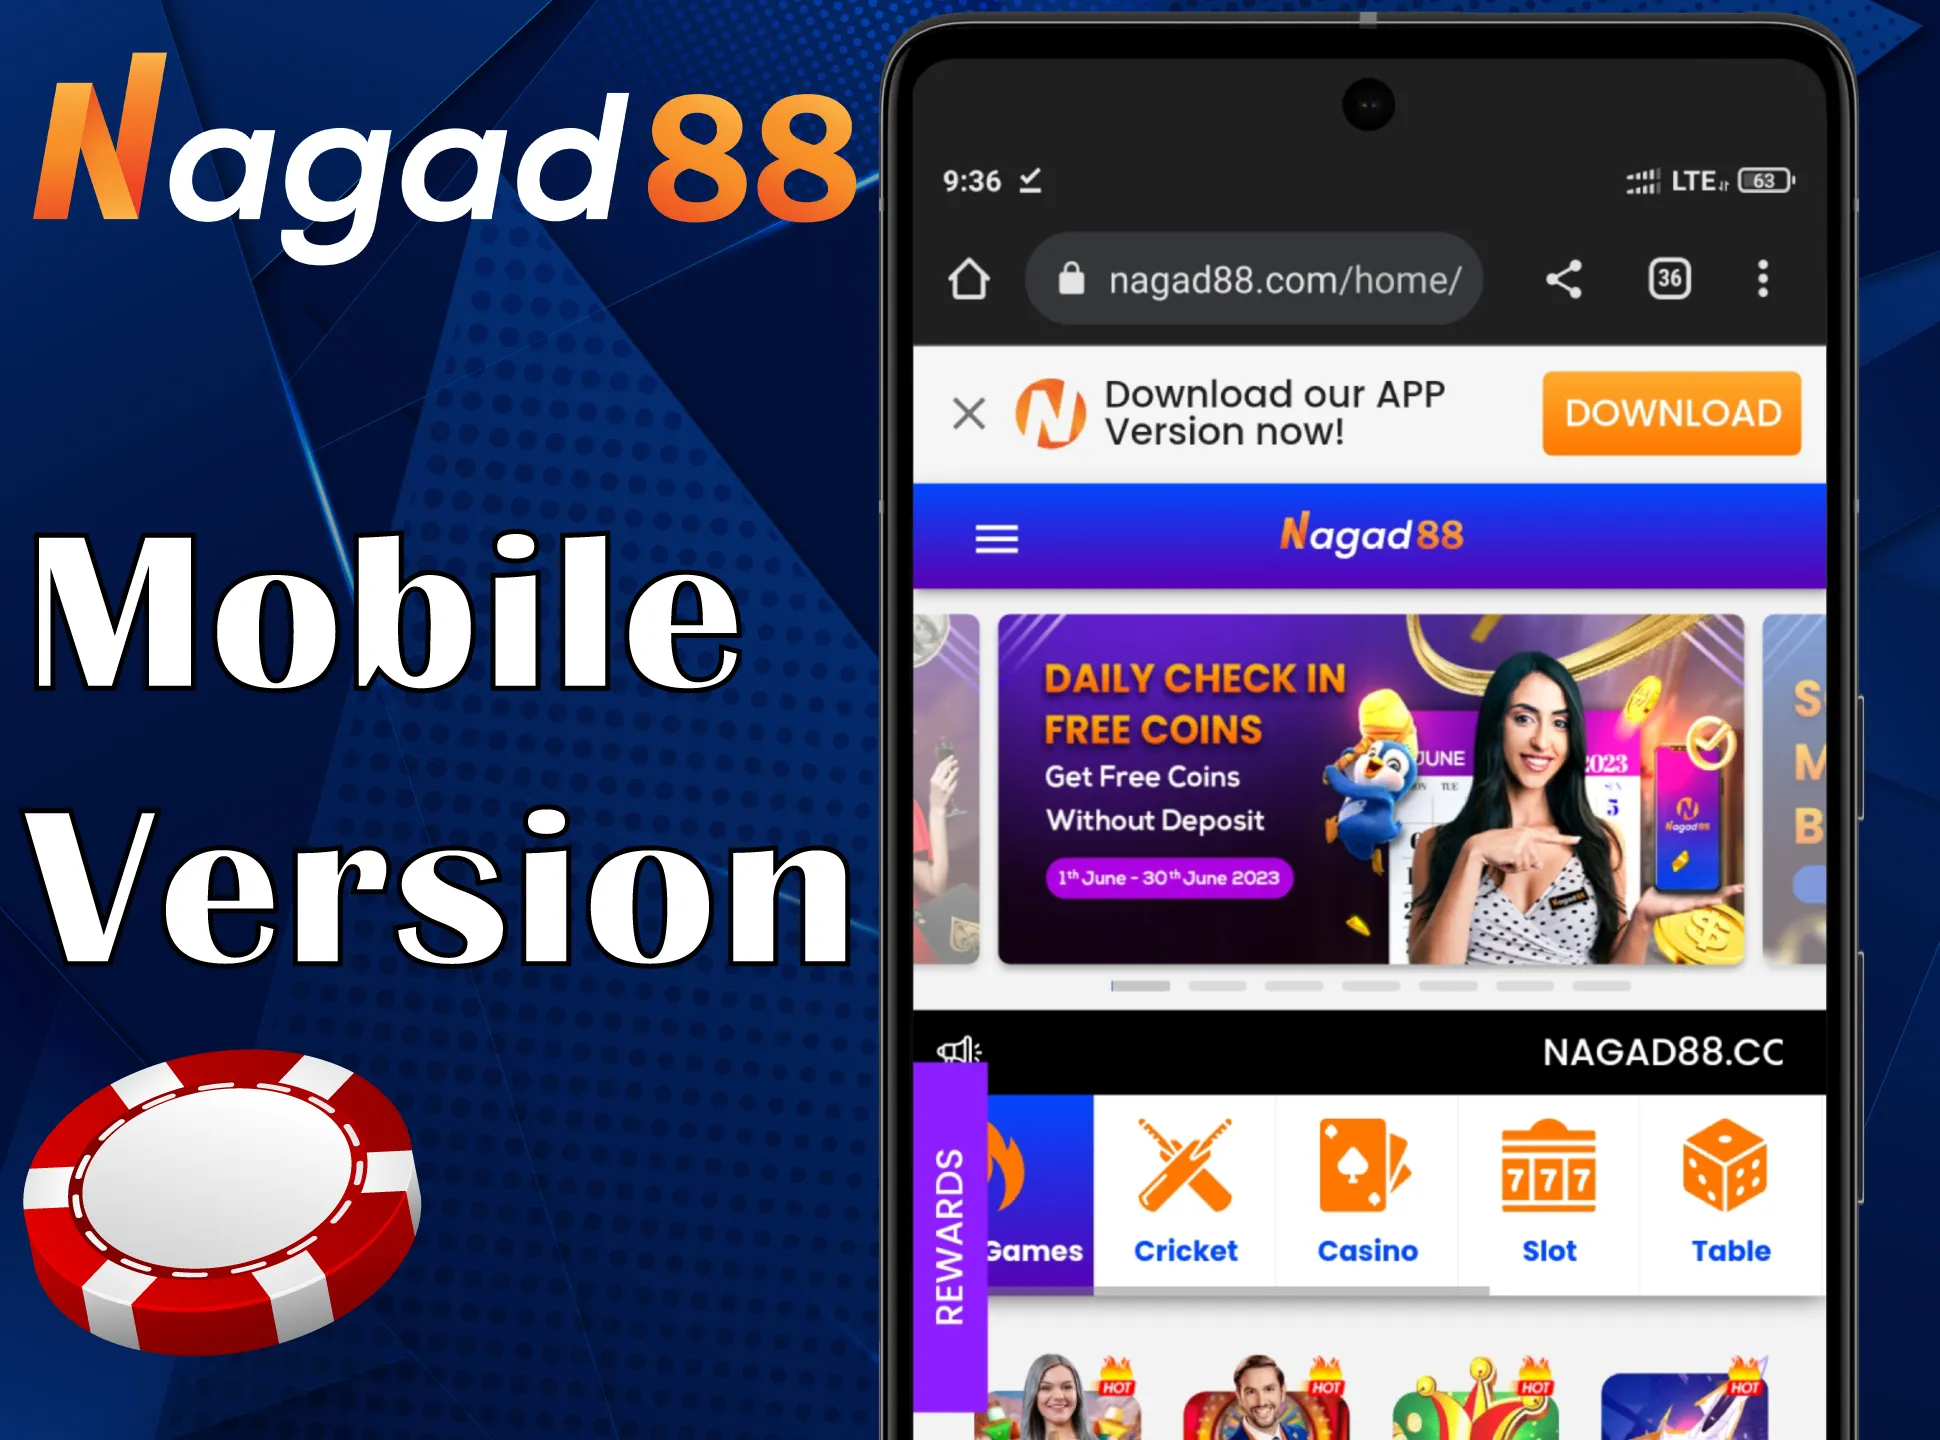 Try the mobile version of the Nagad88.